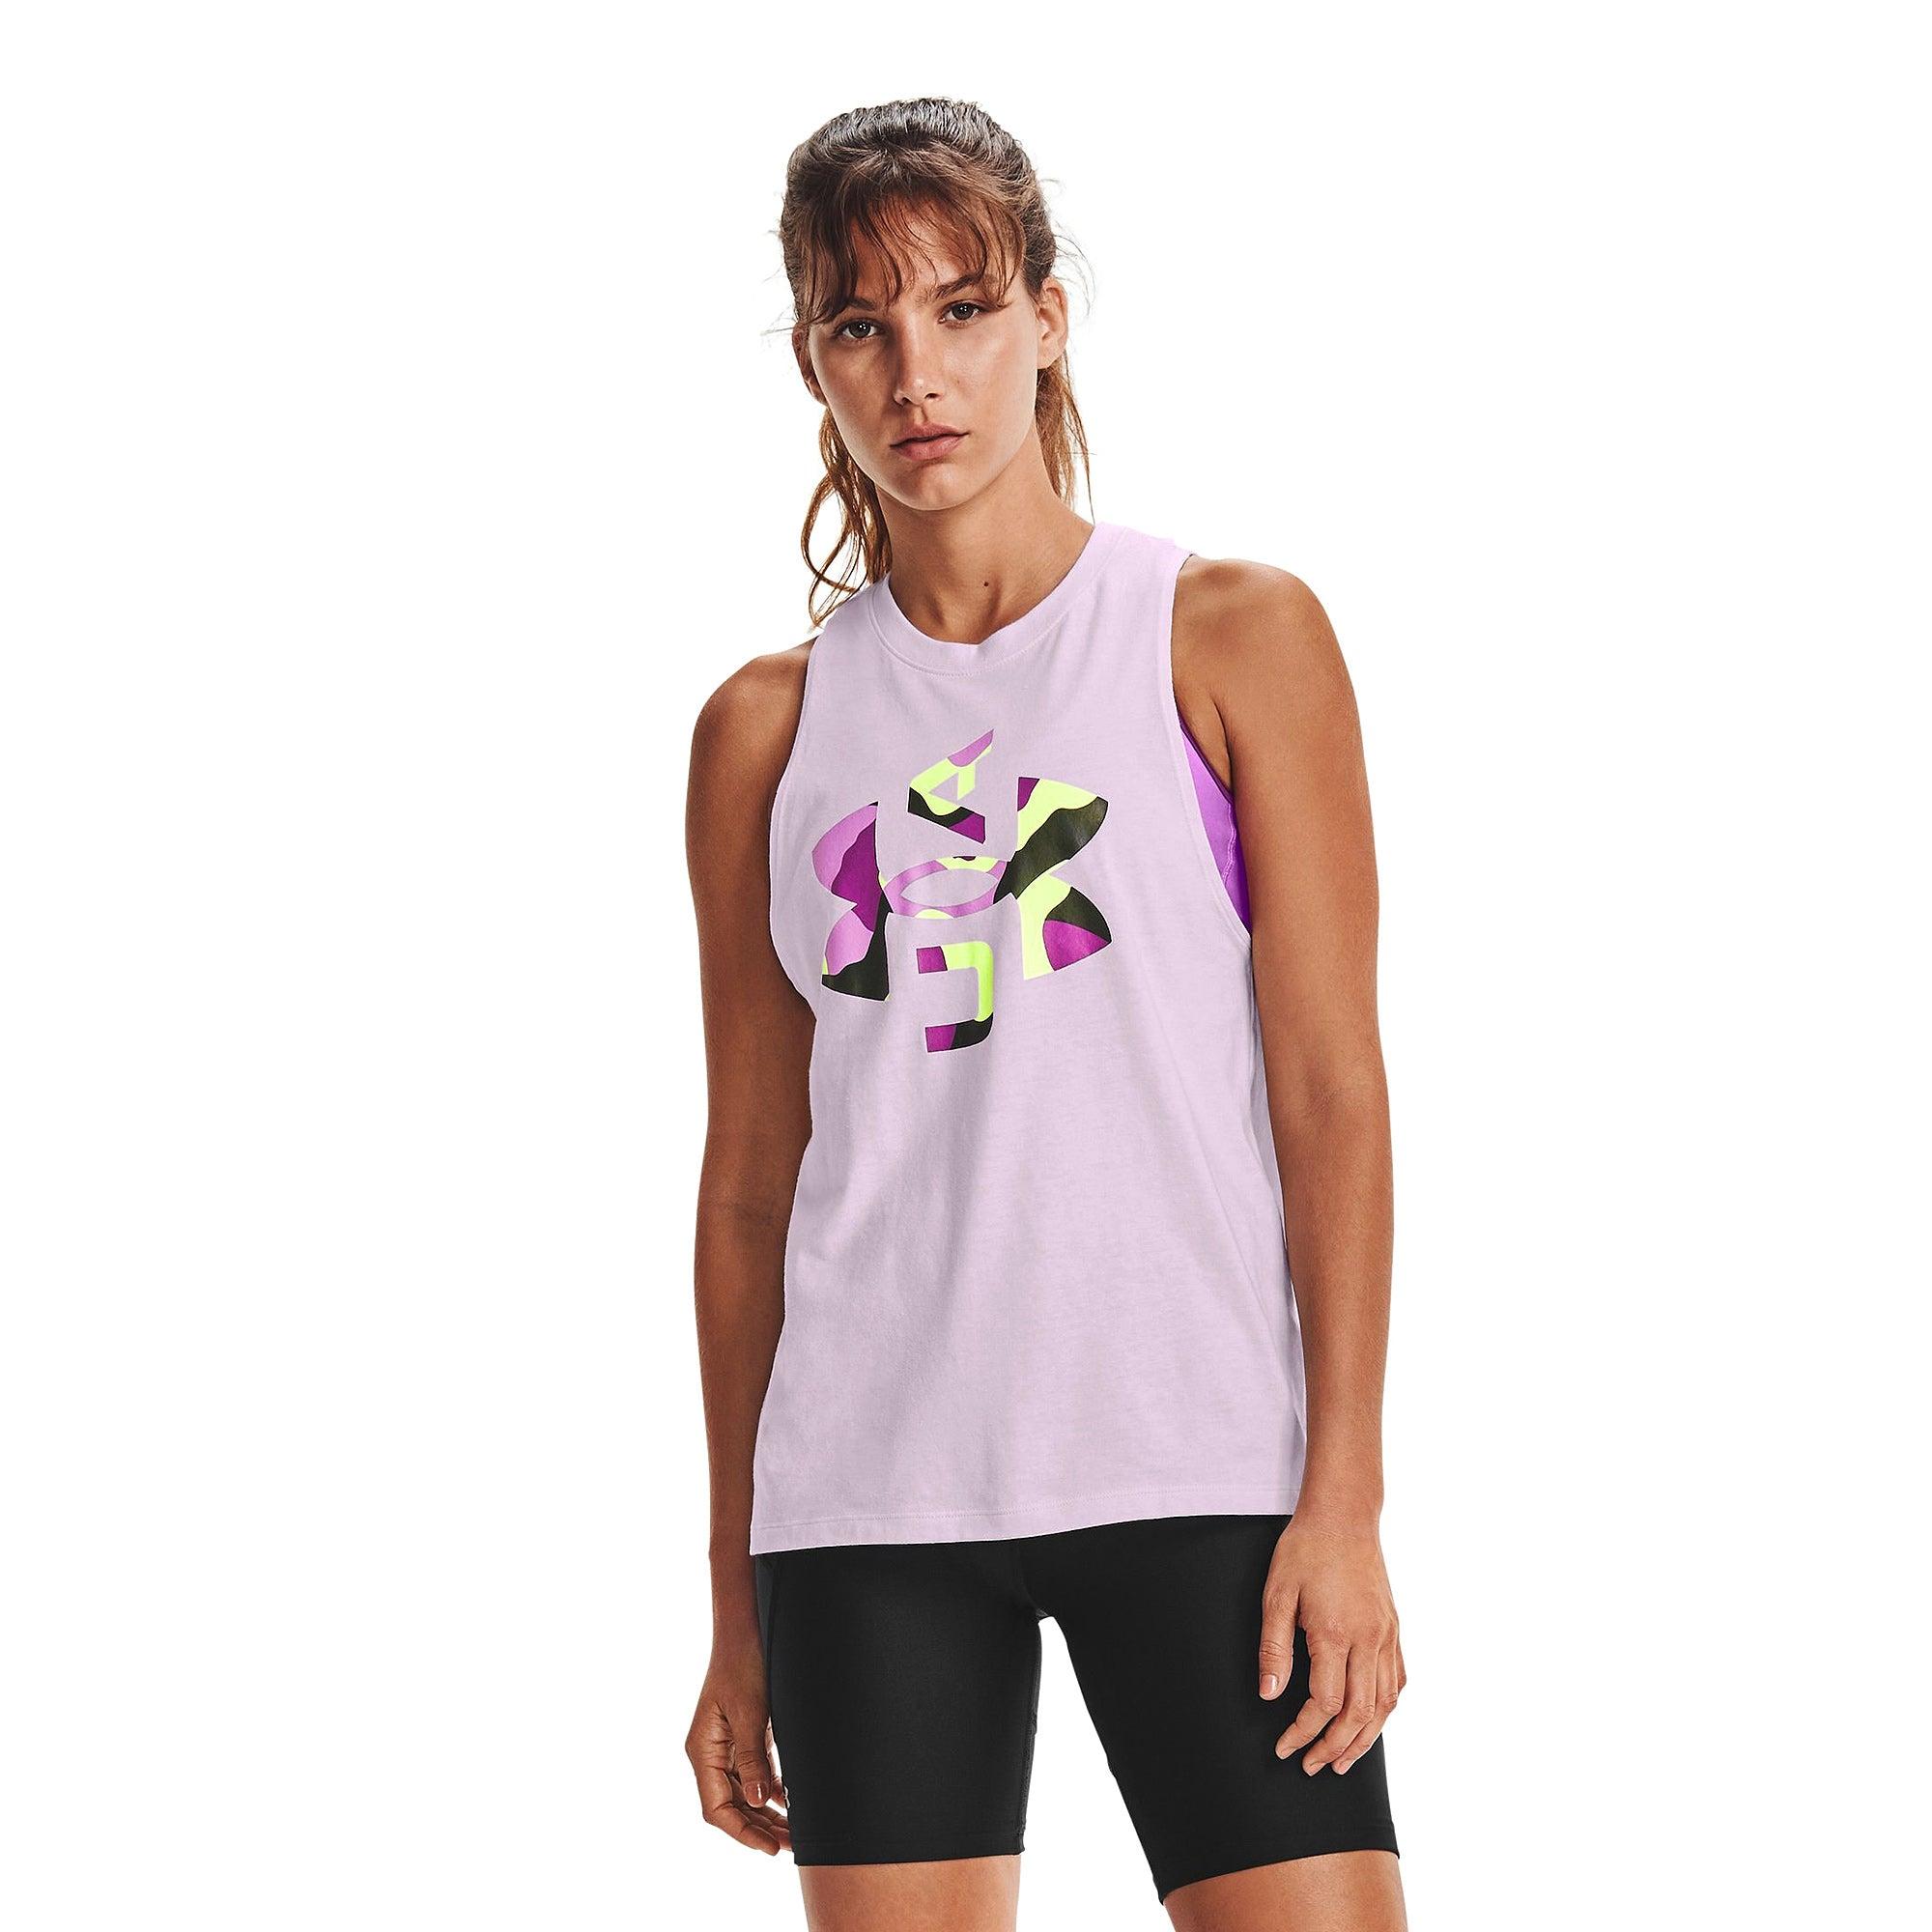 Áo ba lỗ thể thao nữ Under Armour Logo Graphic Muscle - 1356298-570